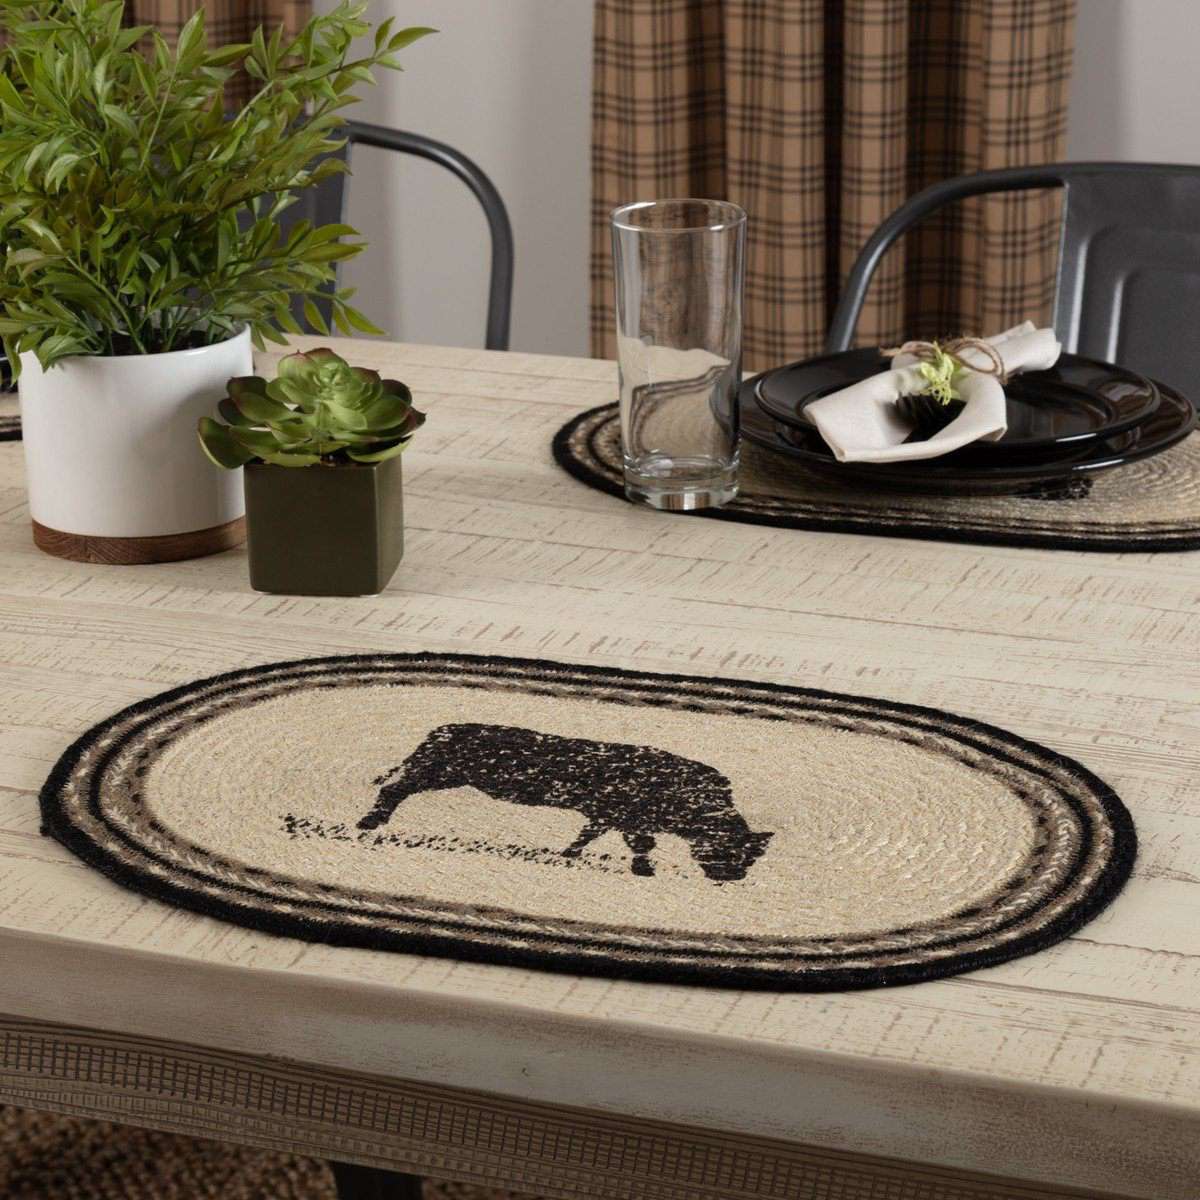 Sawyer Mill Cow Jute Braided Placemat Set of 6 - The Fox Decor